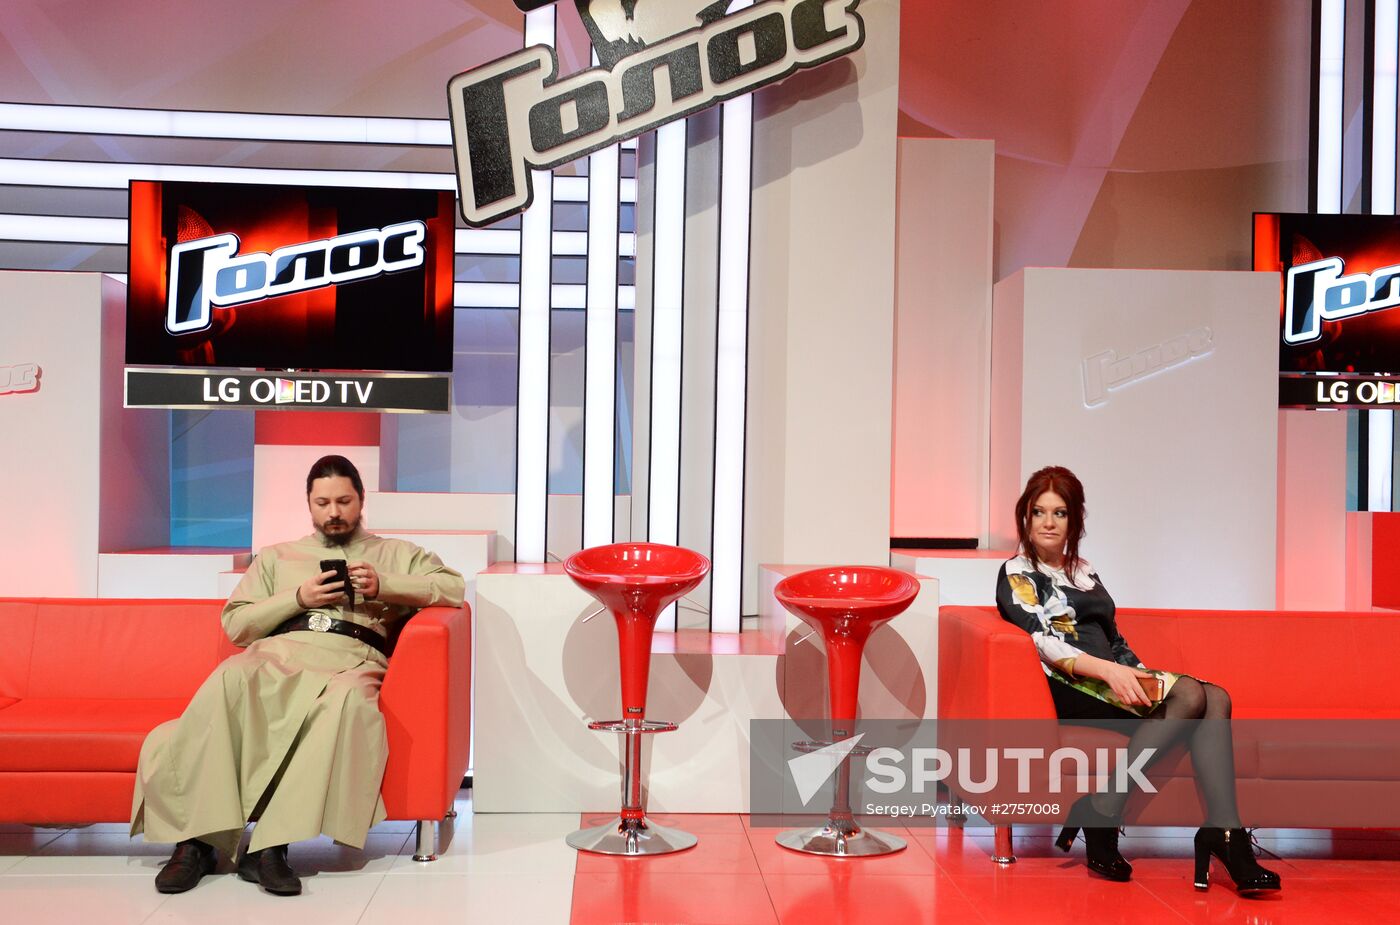 Hieromonk Fotiy takes part in The Voice show